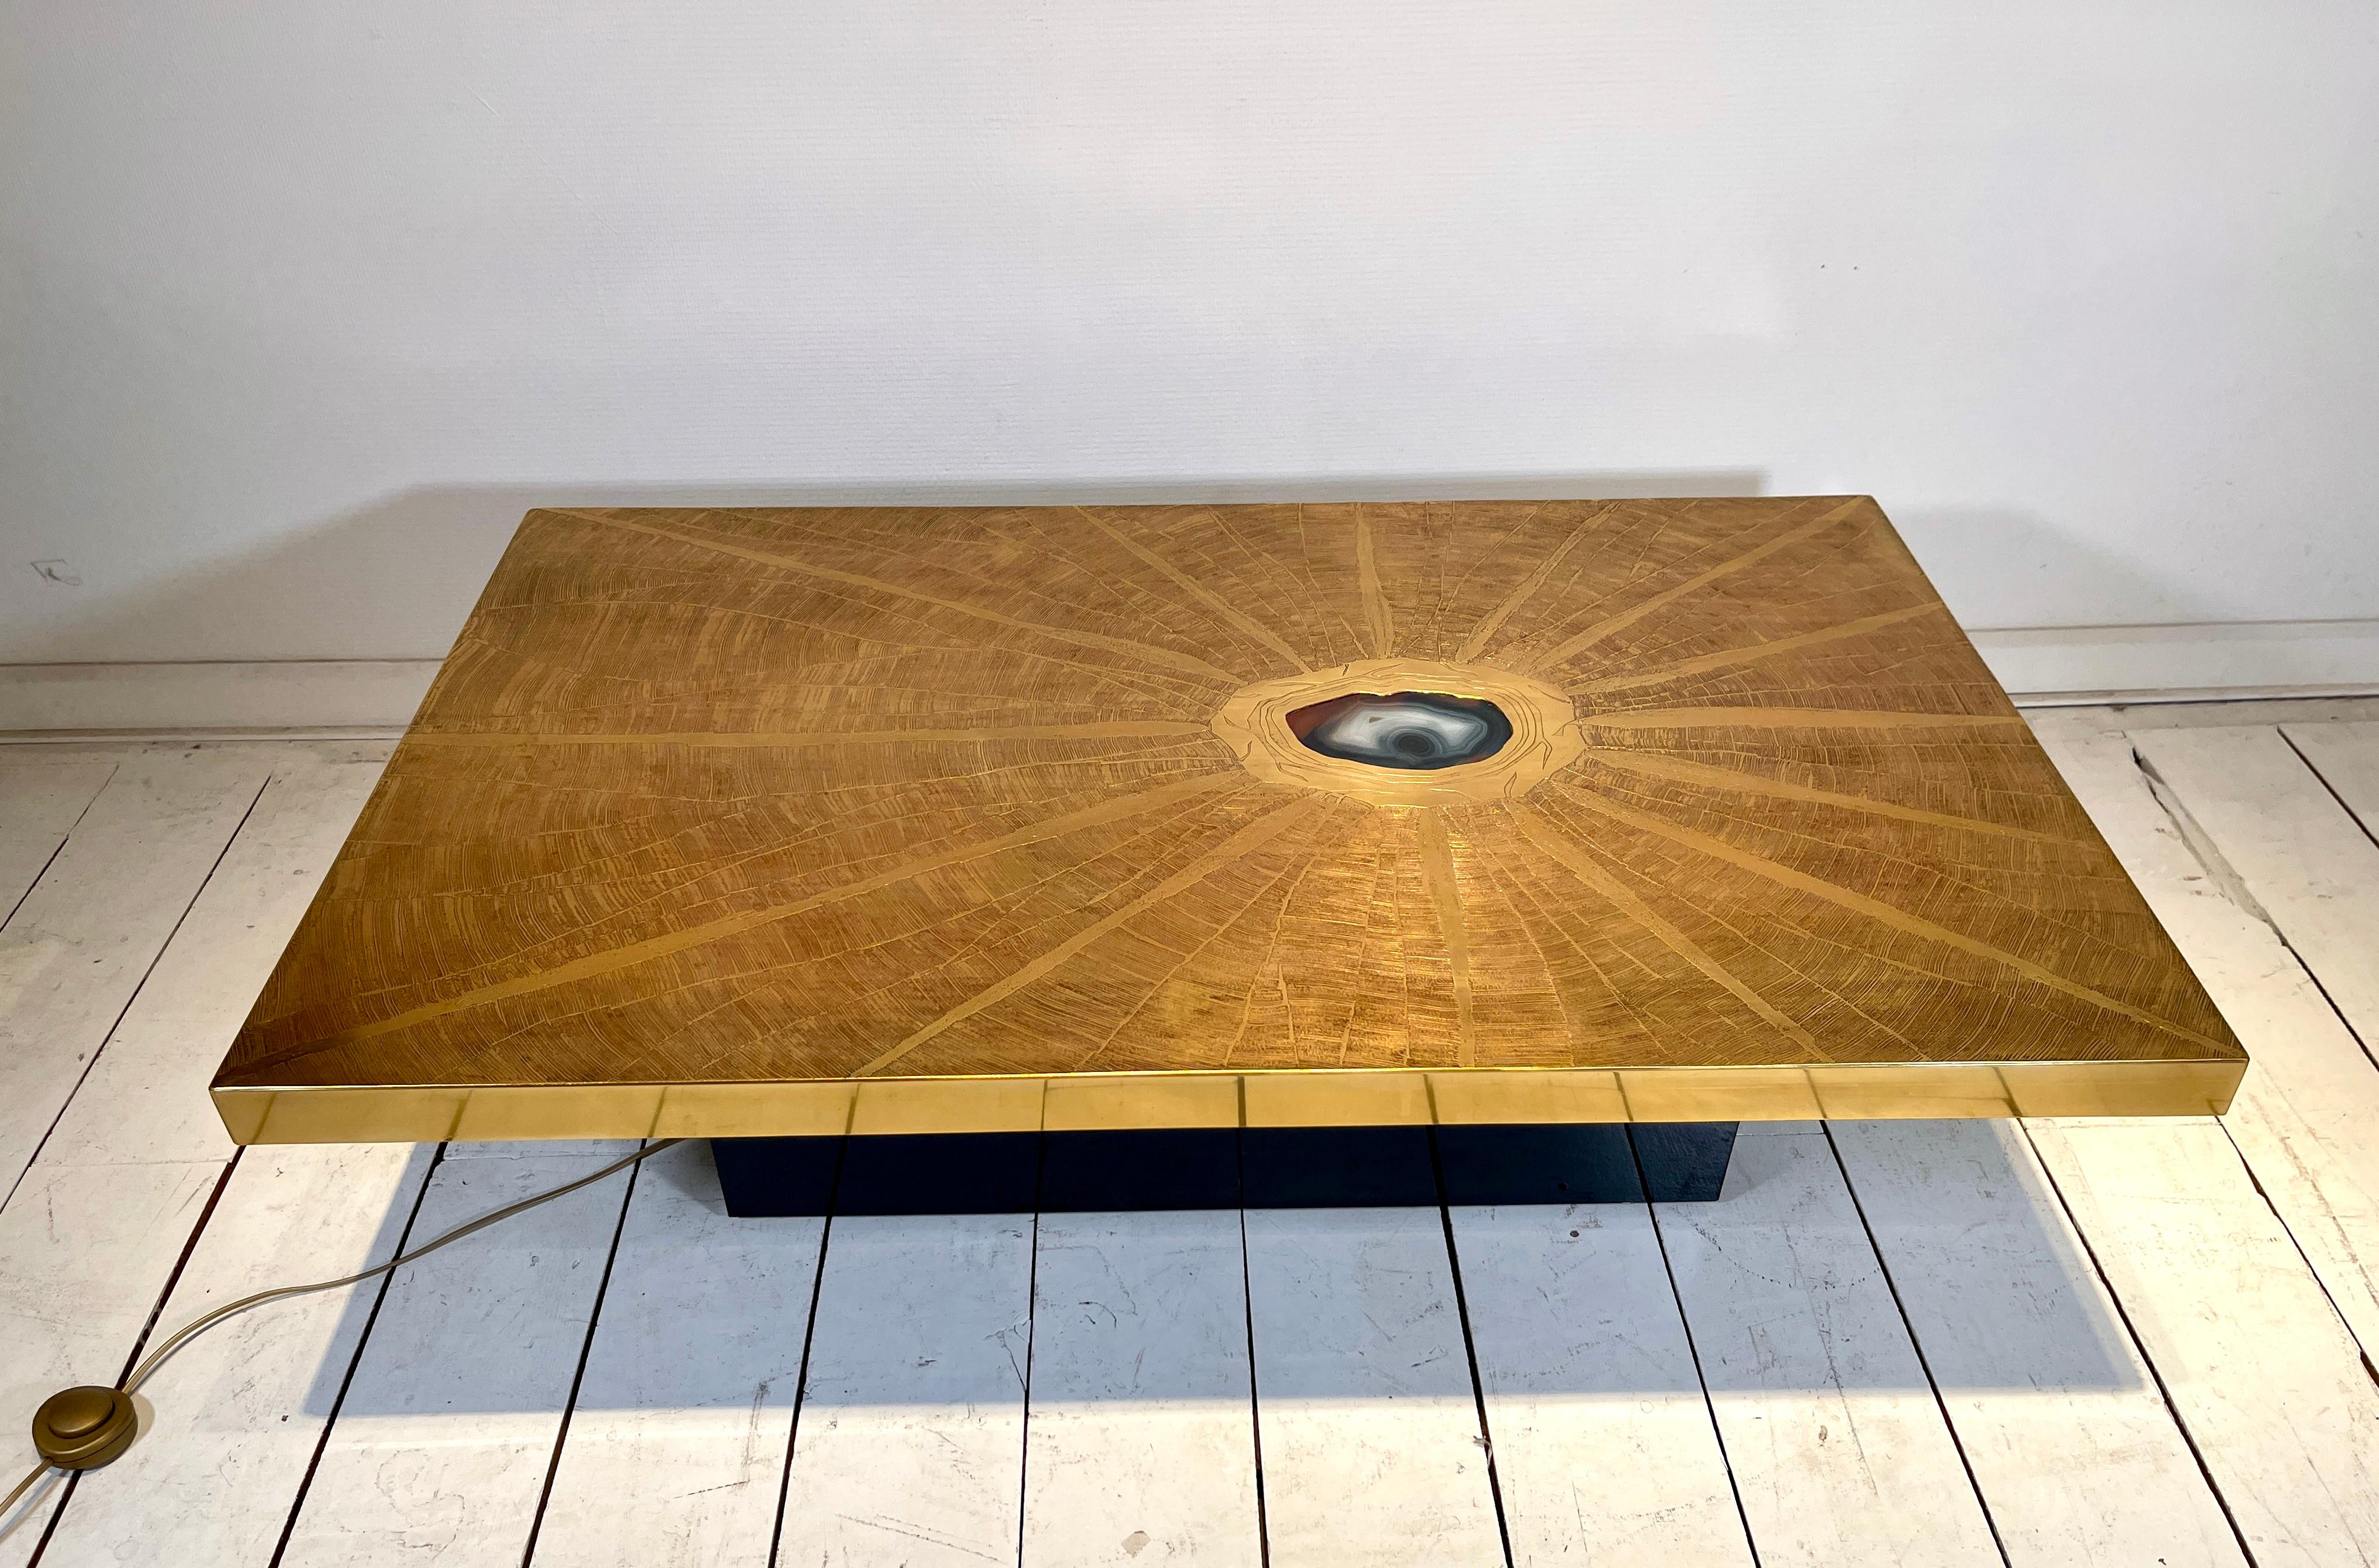 Coffee table etched brass inlaid agate by Lova Creation in perfect condition.  An iconic motif of spider web with an off-center agate.
From the same school of Georges Mathias, Willy Daro, and many others. This coffee table is included with a